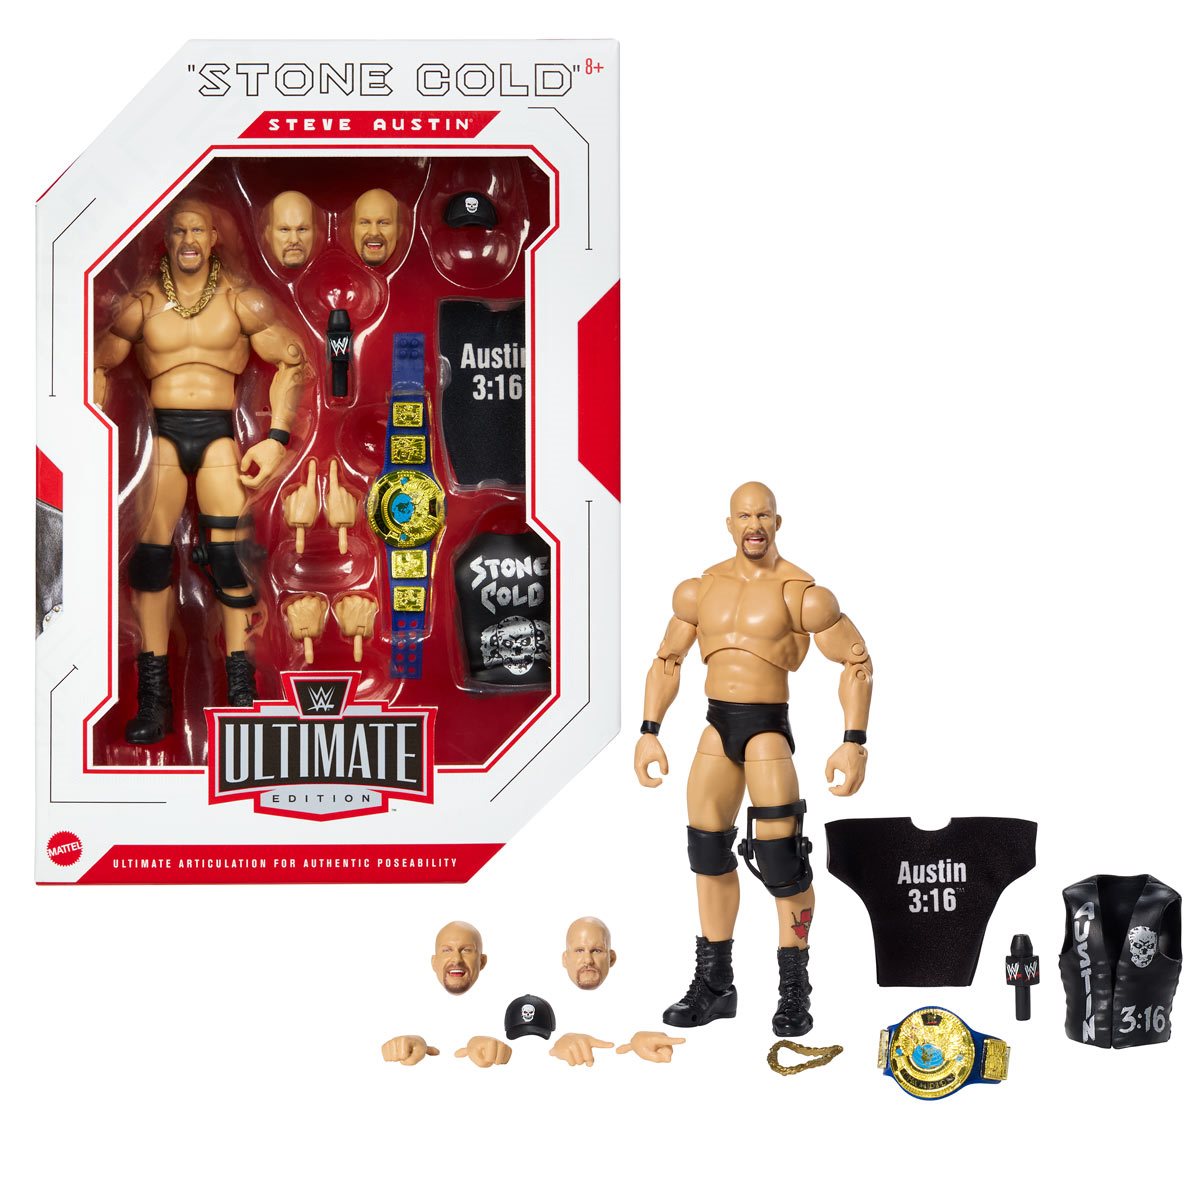 WWE Ultimate Edition Best Of Wave 2 Stone Cold Steve Austin Action Figure with accesories - Heretoserveyou